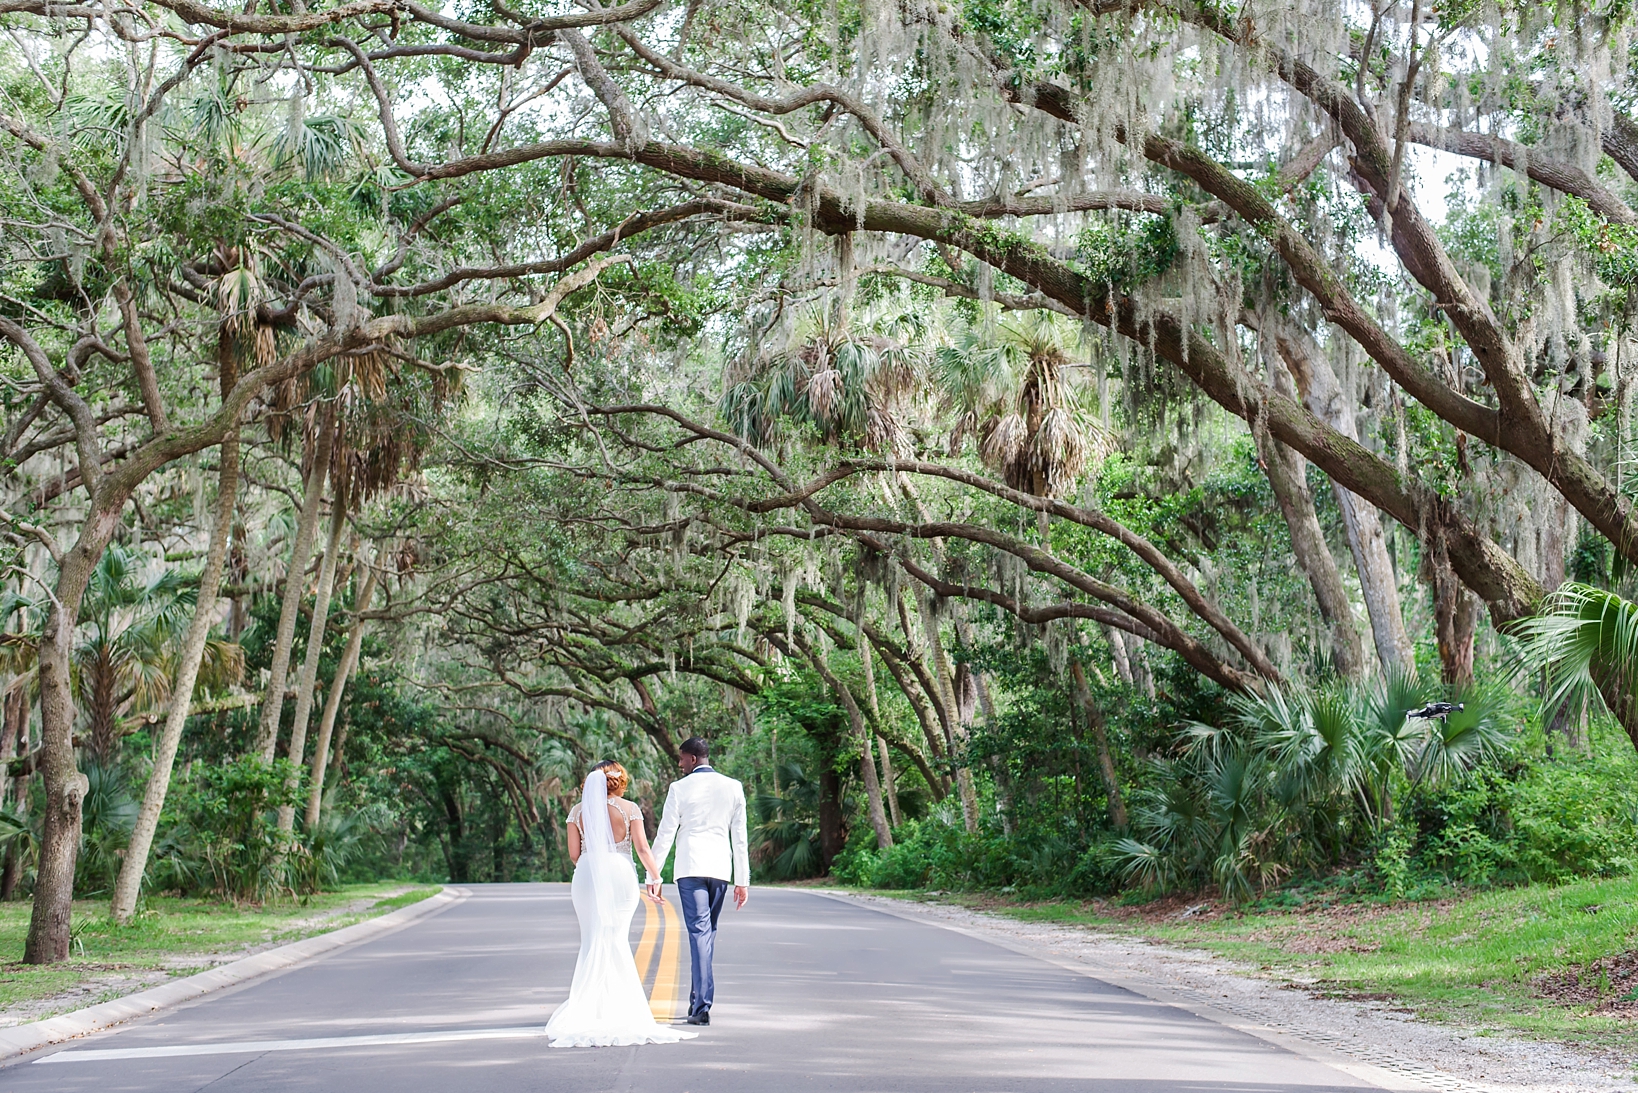 Tree lined street with the Bride and Groom centered under them